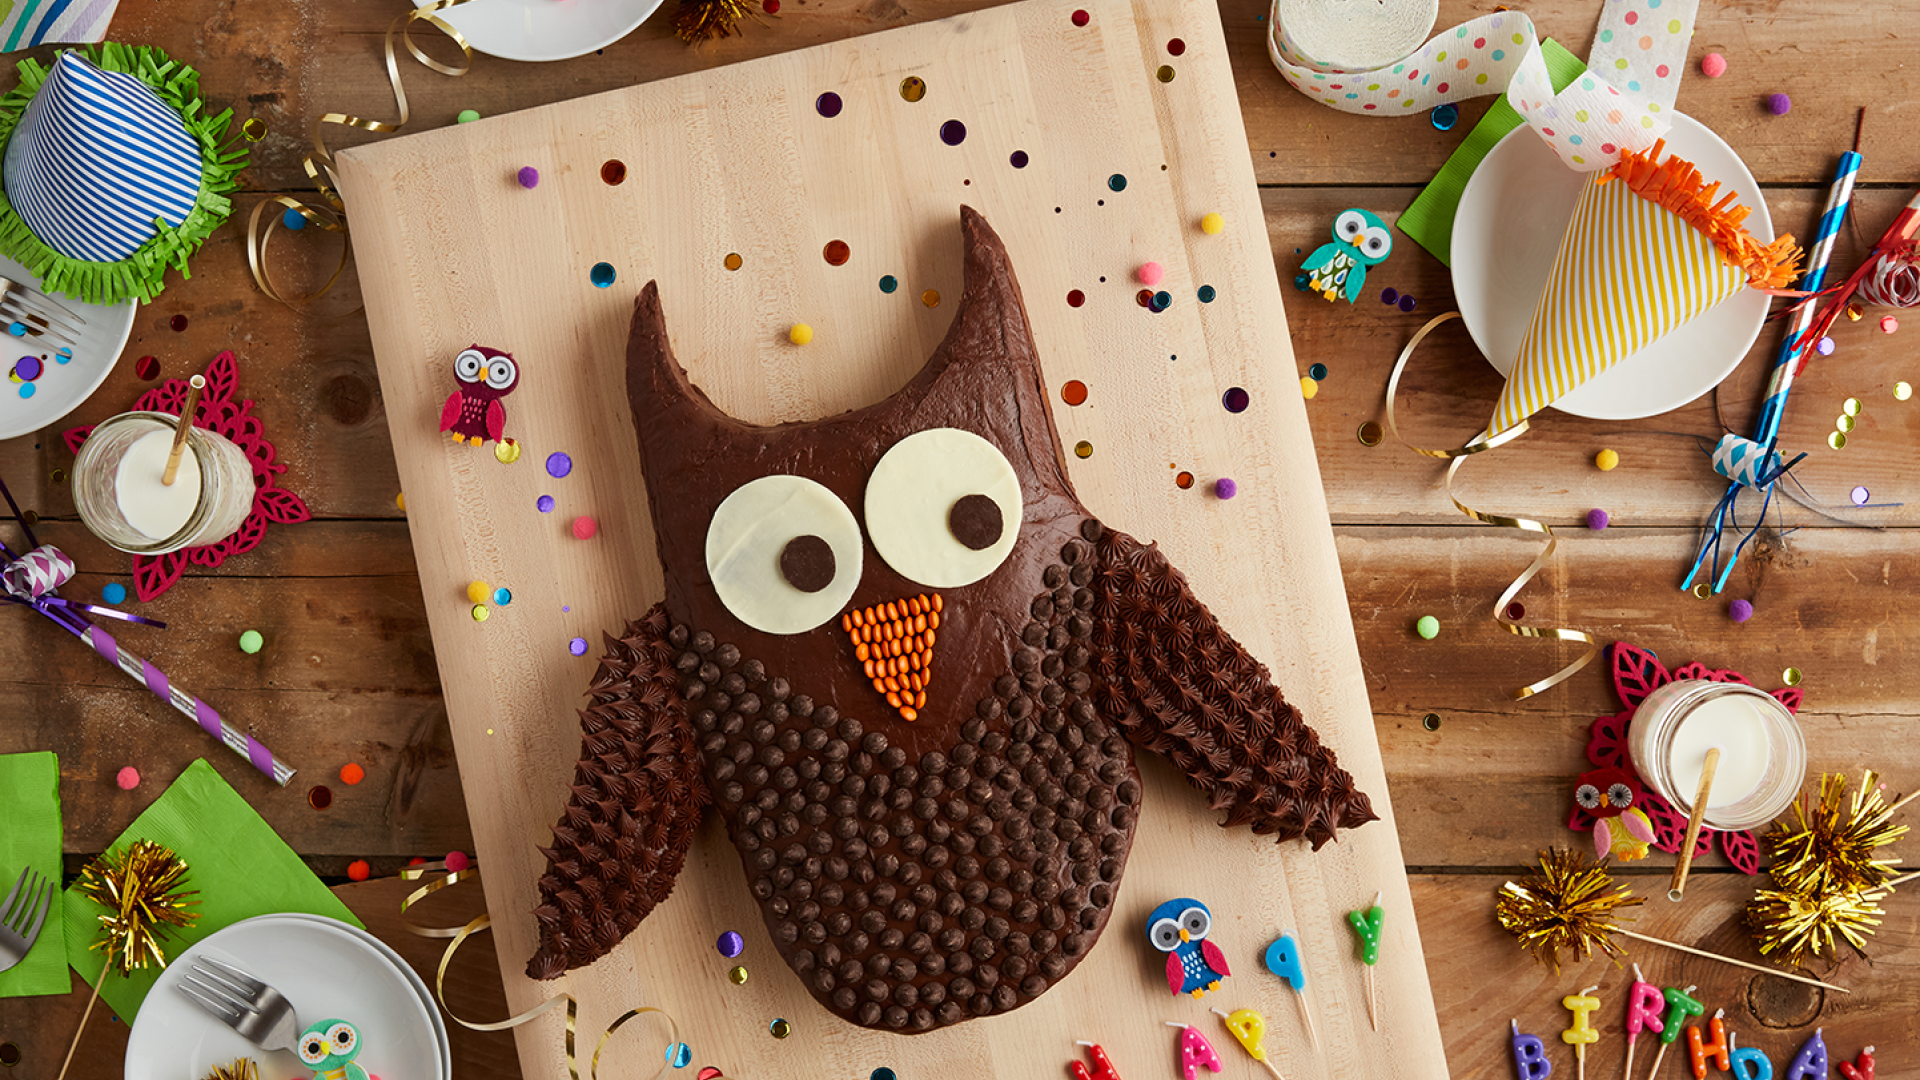 Owl Cakes (from the original creator) - Decorated Cake by - CakesDecor